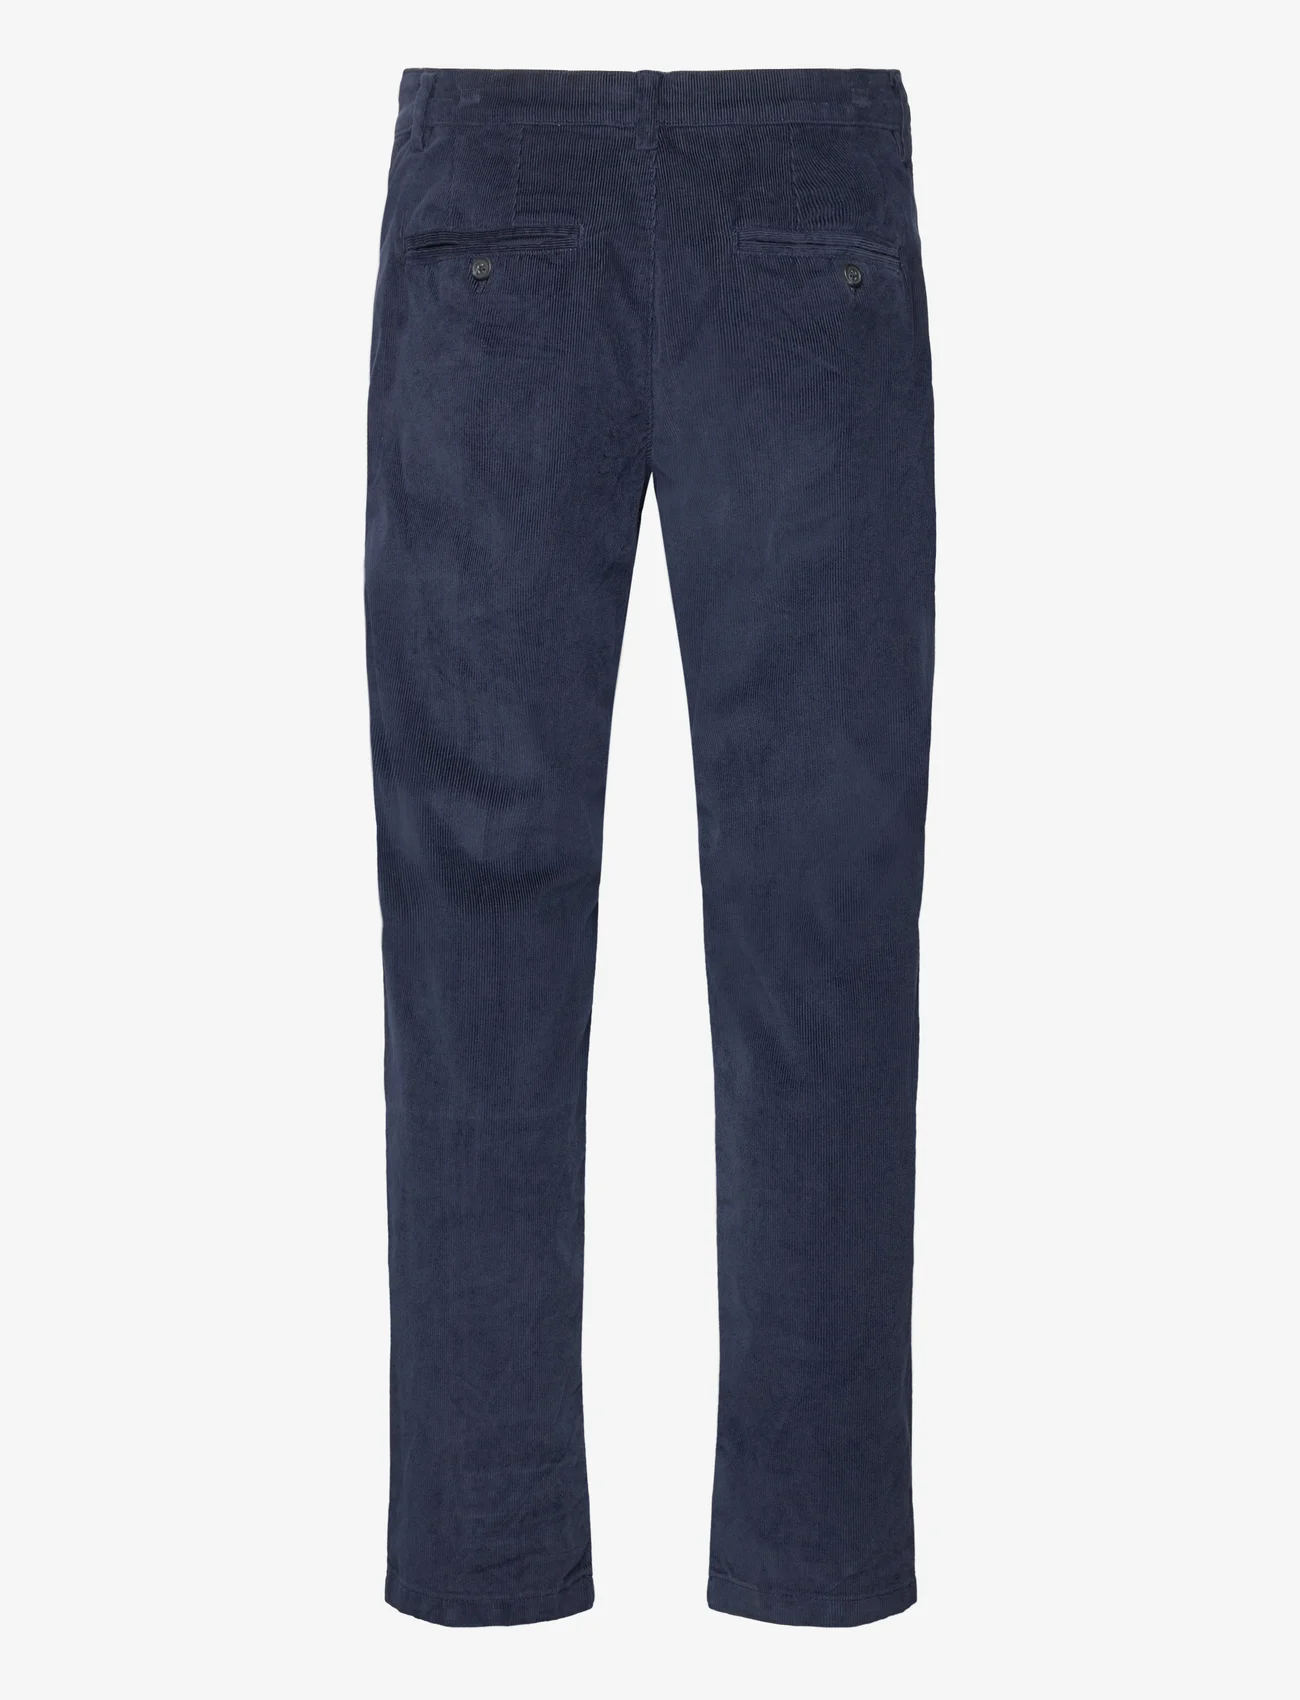 Selected Homme - SLH196-STRAIGHT MILES CORD PANTS W NOOS - chino's - dark sapphire - 1